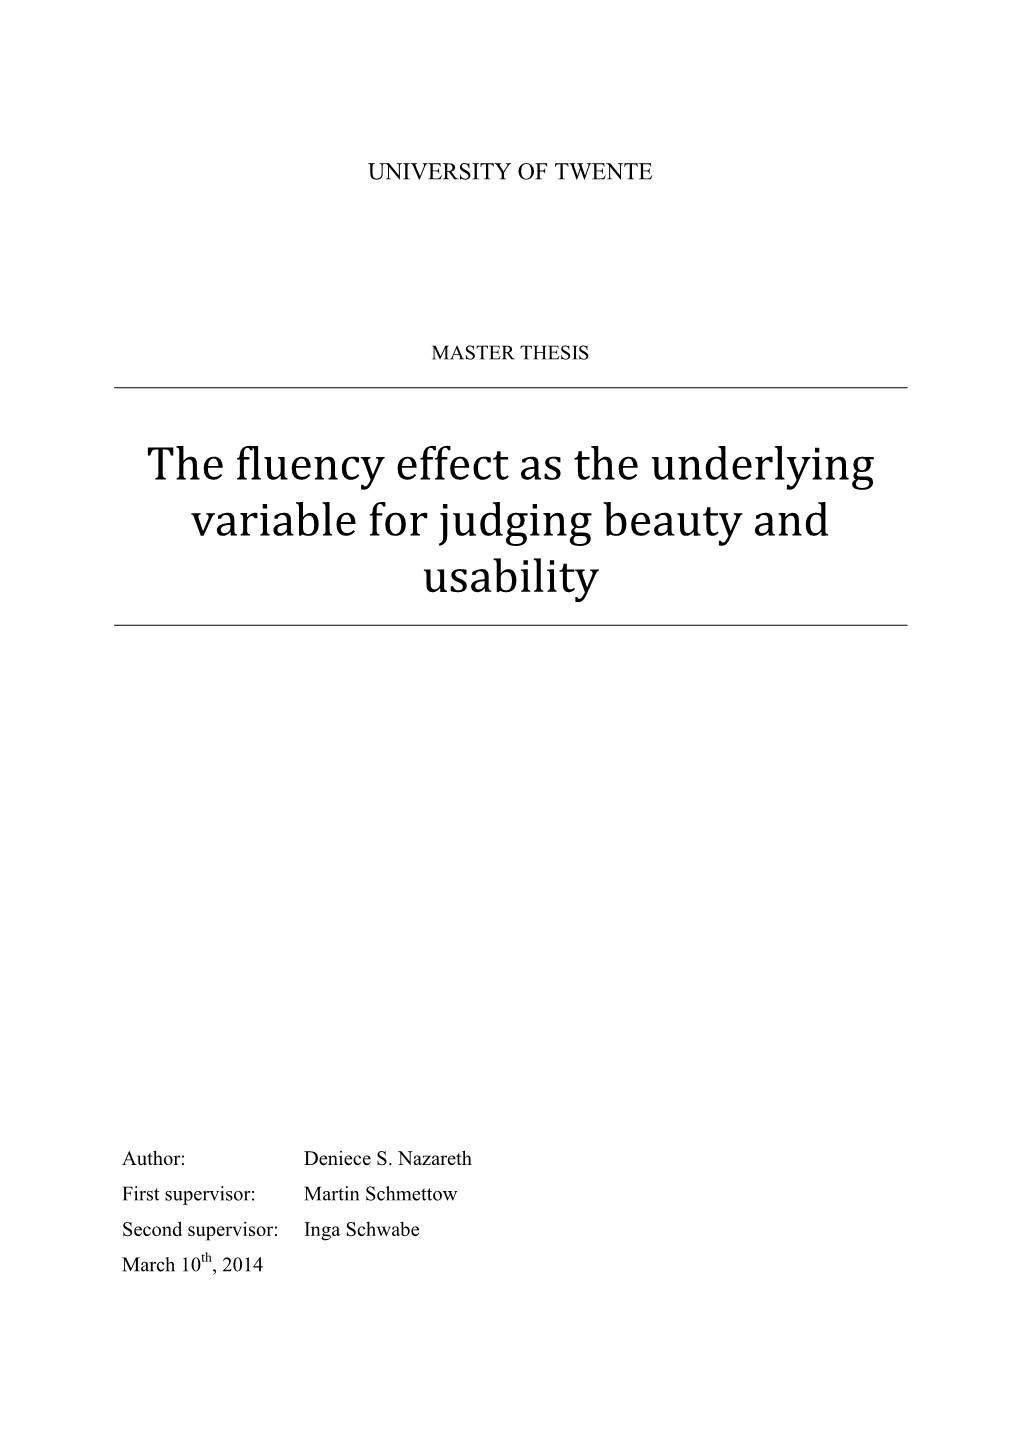 The Fluency Effect As the Underlying Variable for Judging Beauty and Usability